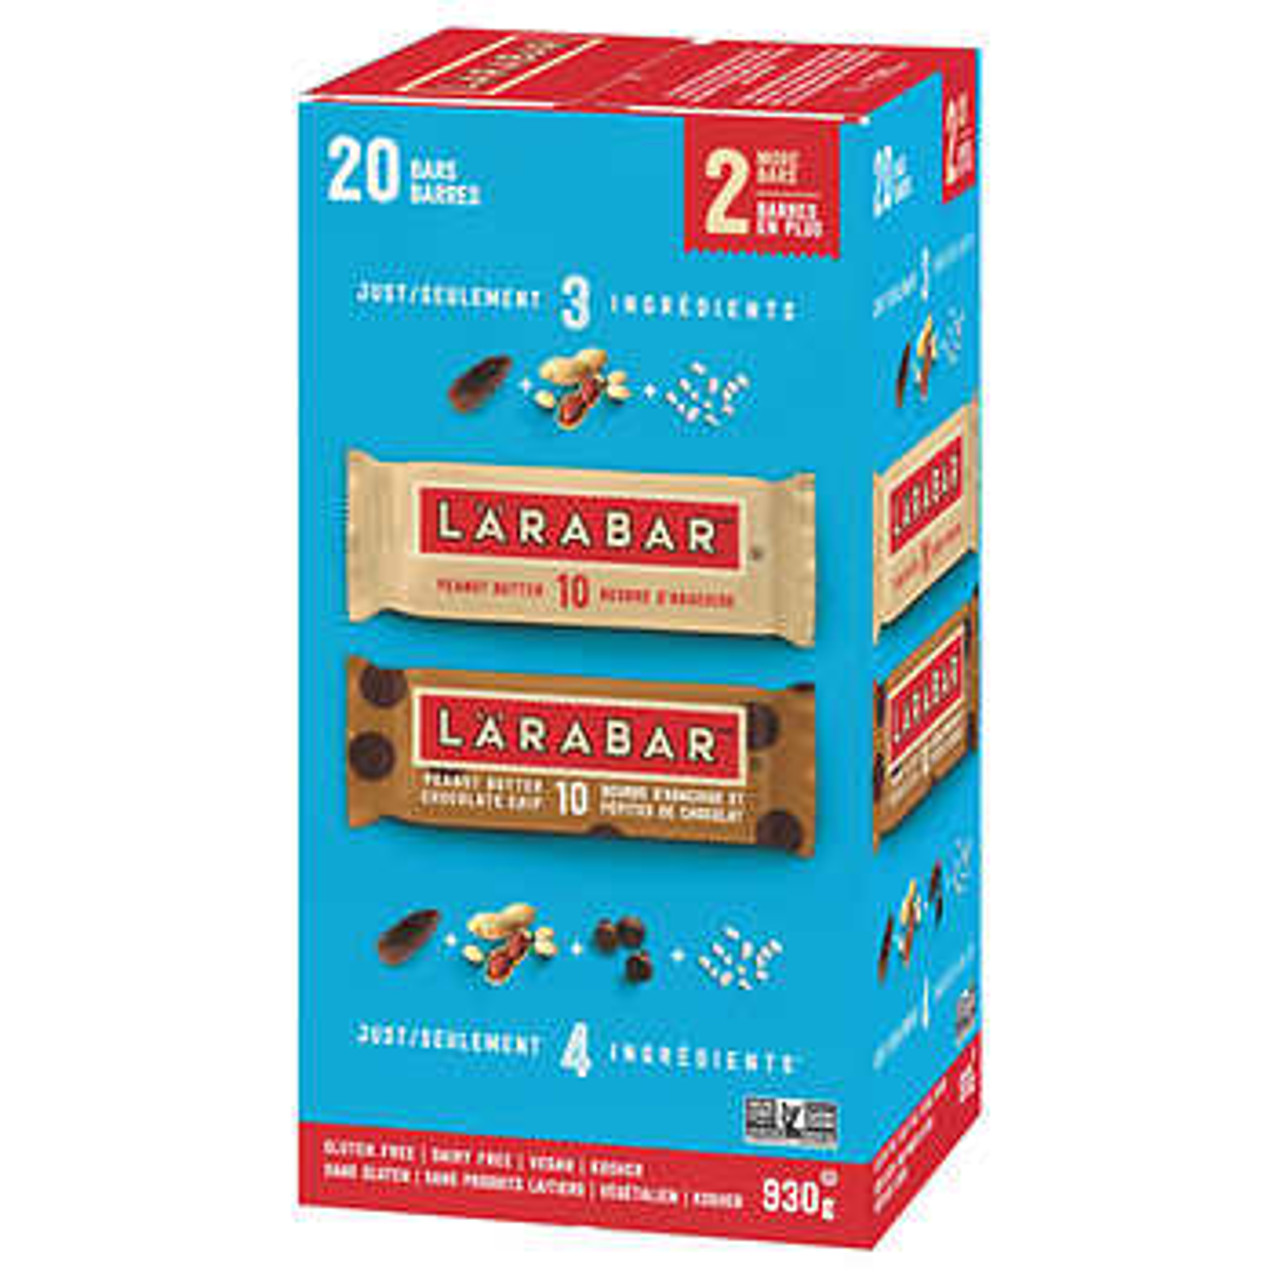 Lärabar Bars Variety Pack - 930g Total - Explore Flavorful Snacking Options- Chicken Pieces